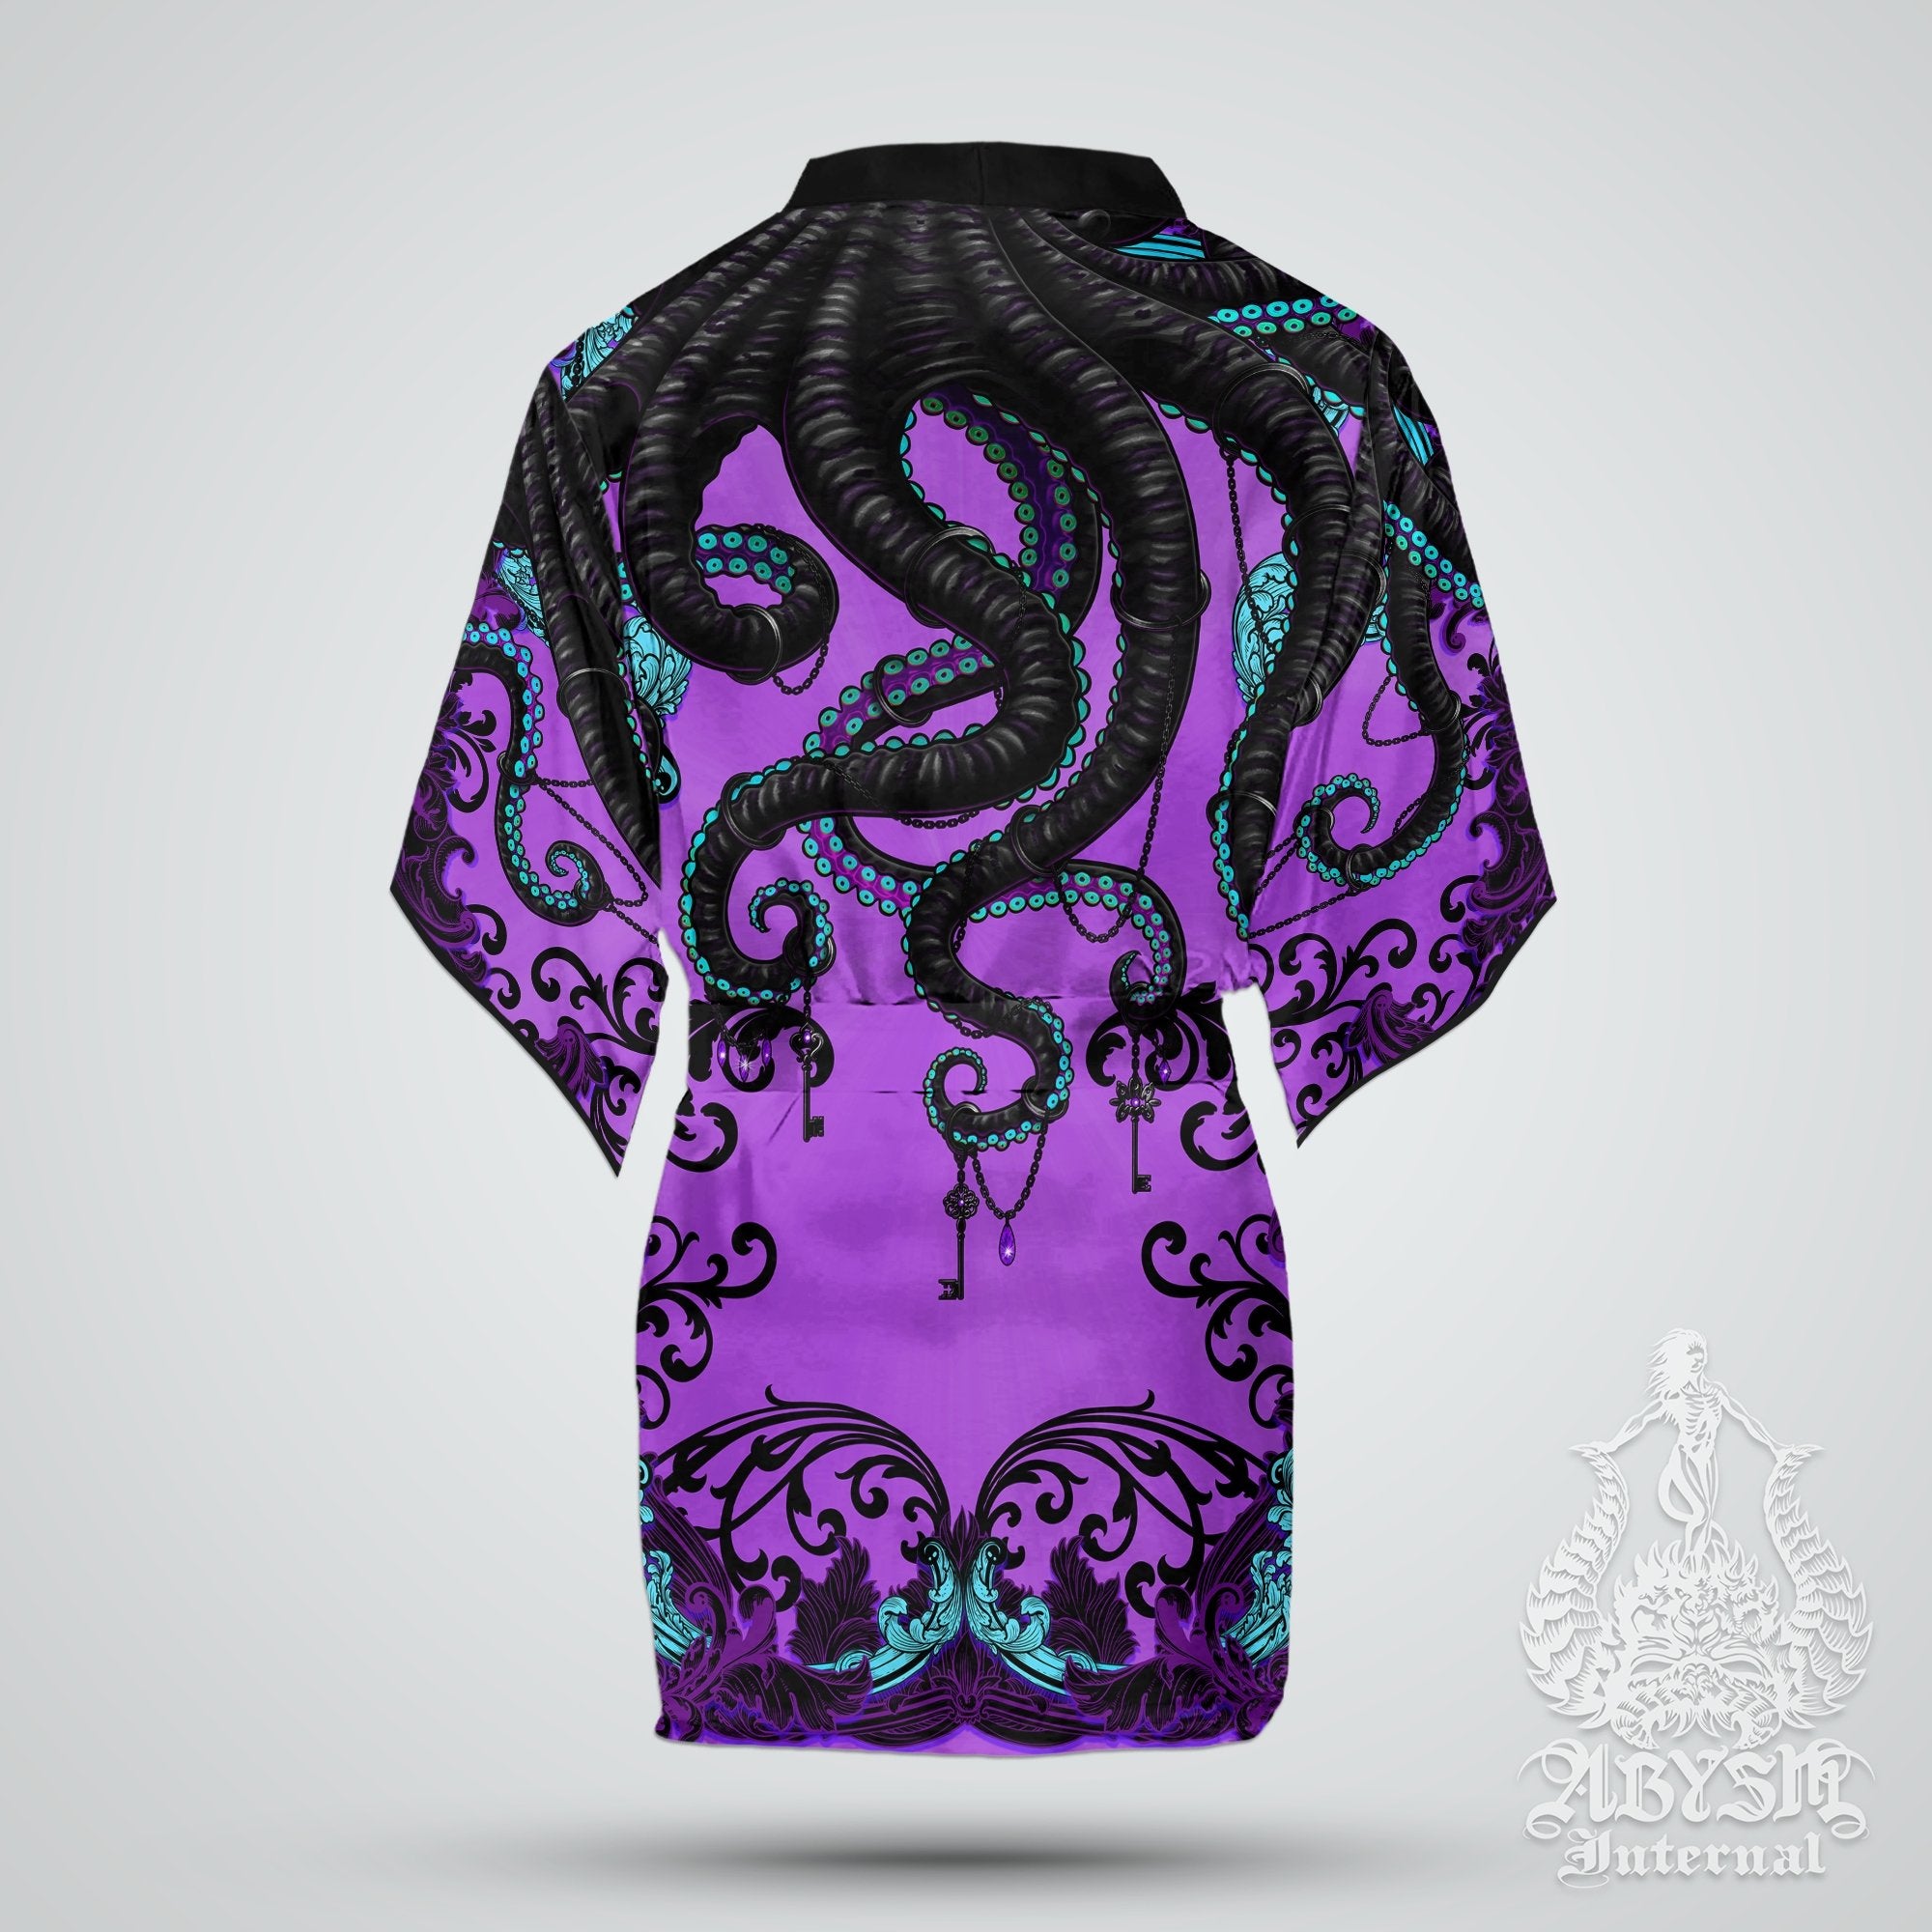 Pastel Goth Cover Up, Beach Outfit, Octopus Party Kimono, Beach Summer Festival Robe, Indie and Alternative Clothing, Unisex - Abysm Internal